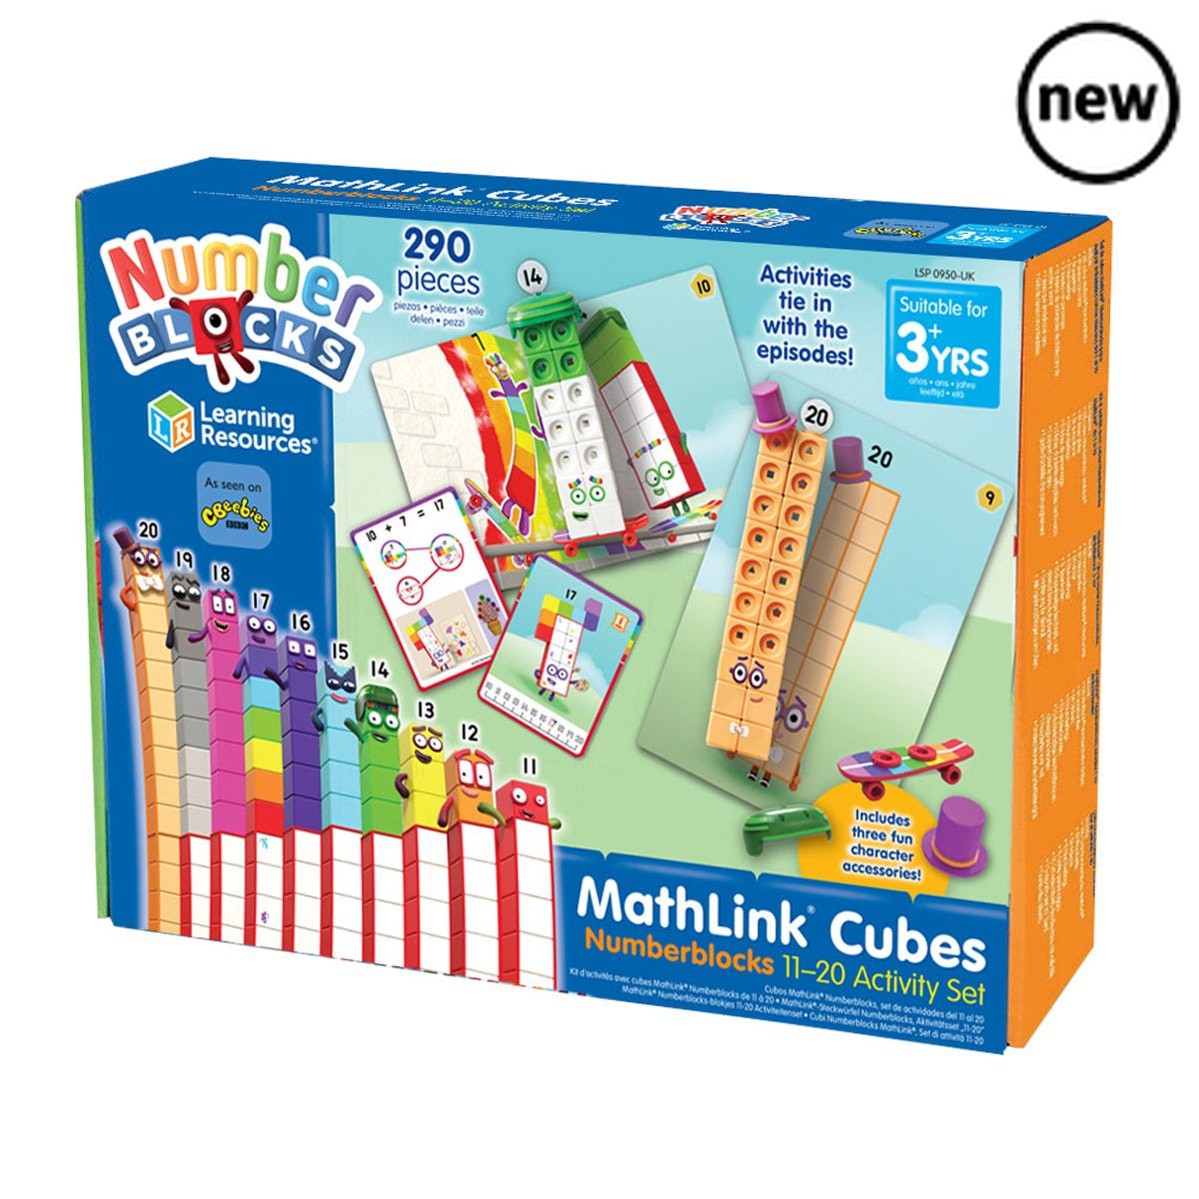 MathLink® Cubes Numberblocks 11-20 Activity Set, Meet the Numberblocks, stars of the award-winning CBeebies series! Now children can use special edition Numberblocks MathLink Cubes to build the Numberblocks Eleven to Twenty in all the ways shown in the series, and master early maths skills through fun activities. Ideal for learning in the classroom and at home, this MathLink Cubes Numberblocks 11-20 Activity Set brings Numberblocks learning to life as children create their very own Numberblocks Eleven to Tw